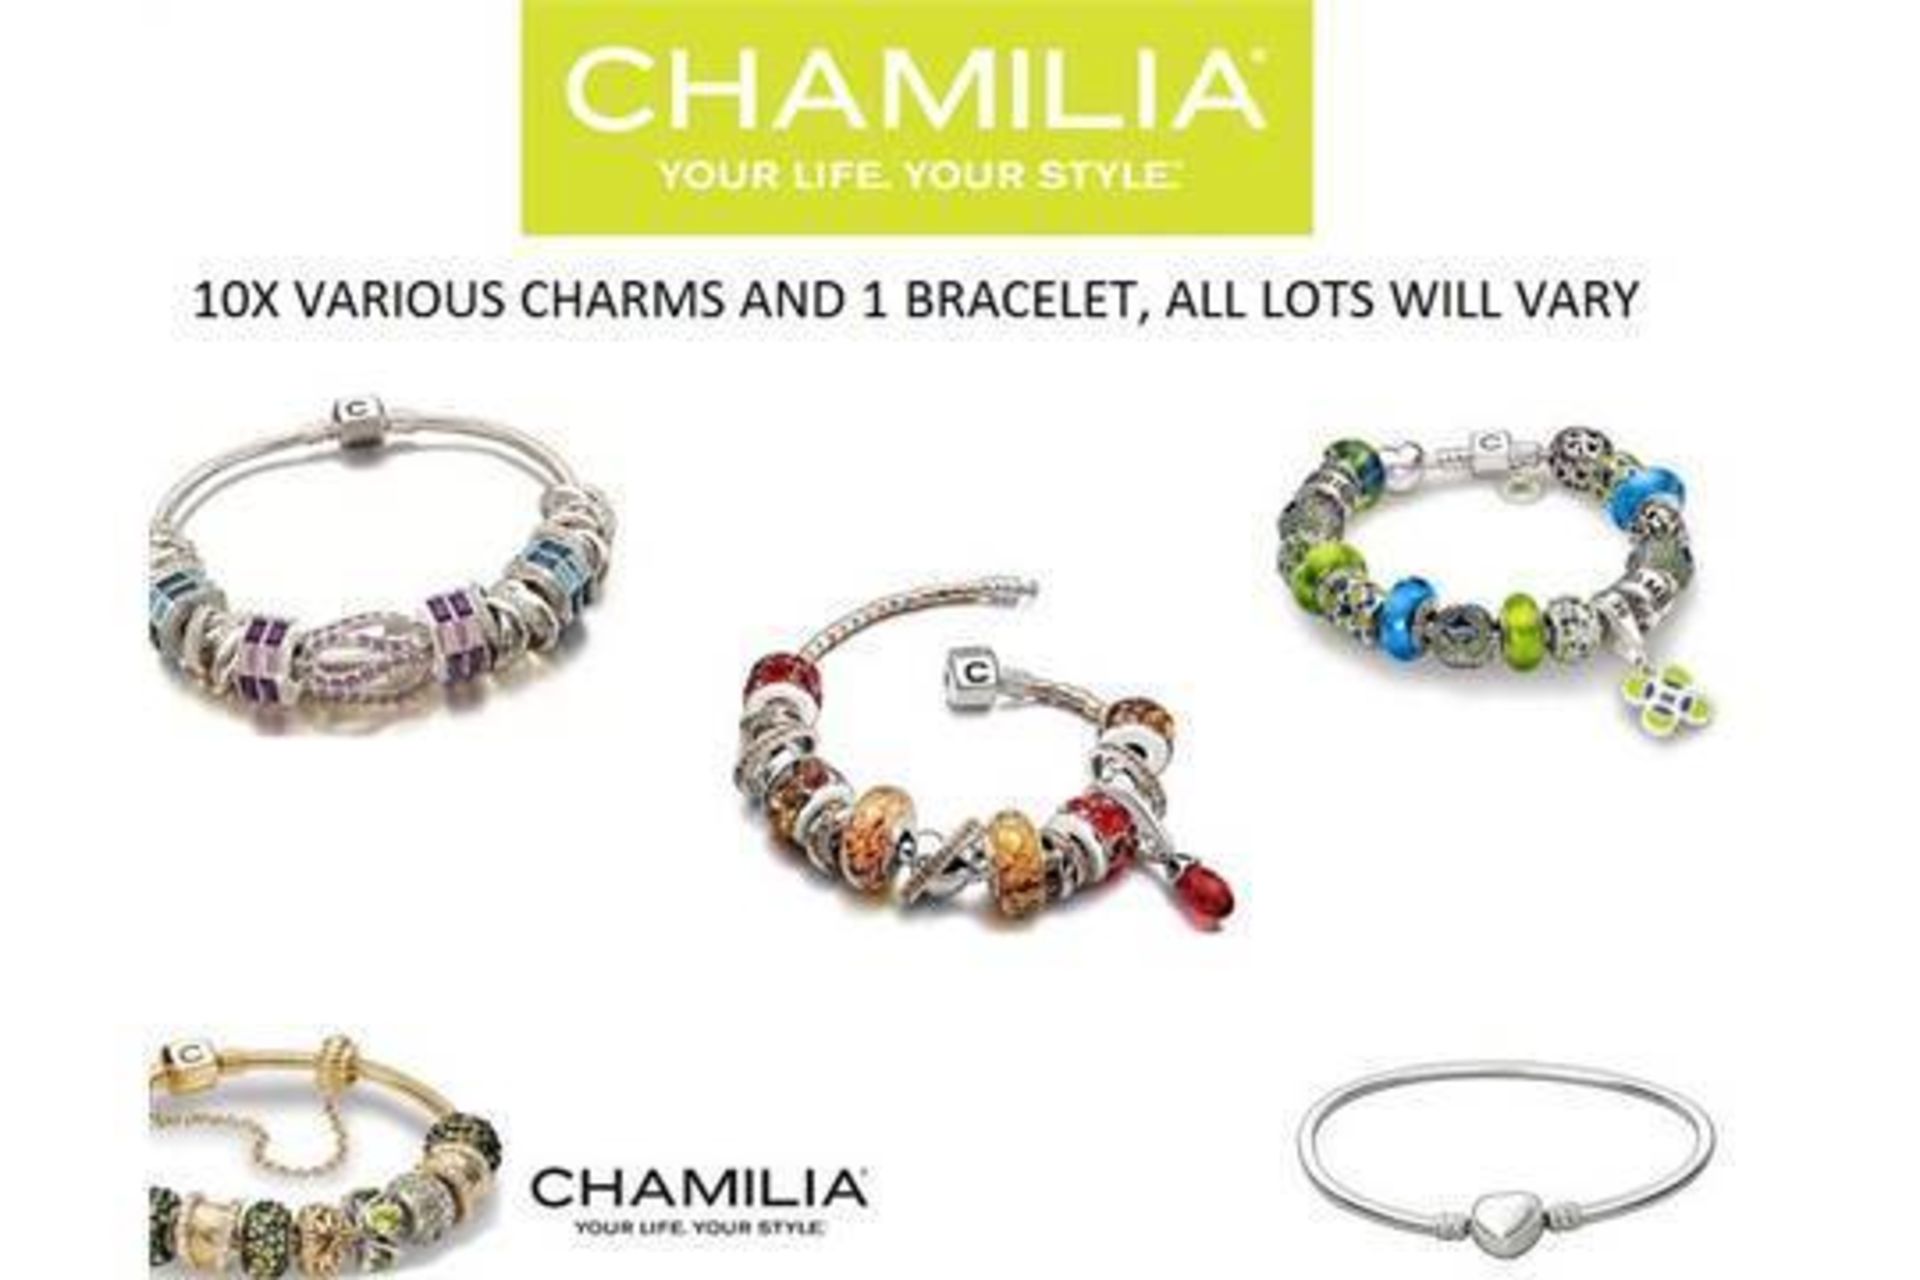 BRAND NEW FACTORY SEALED CHAMILIA LADIES CHARM BRACELET AND 10 CHARMS ALL CHARMS VARIOUS COMBINE RRP